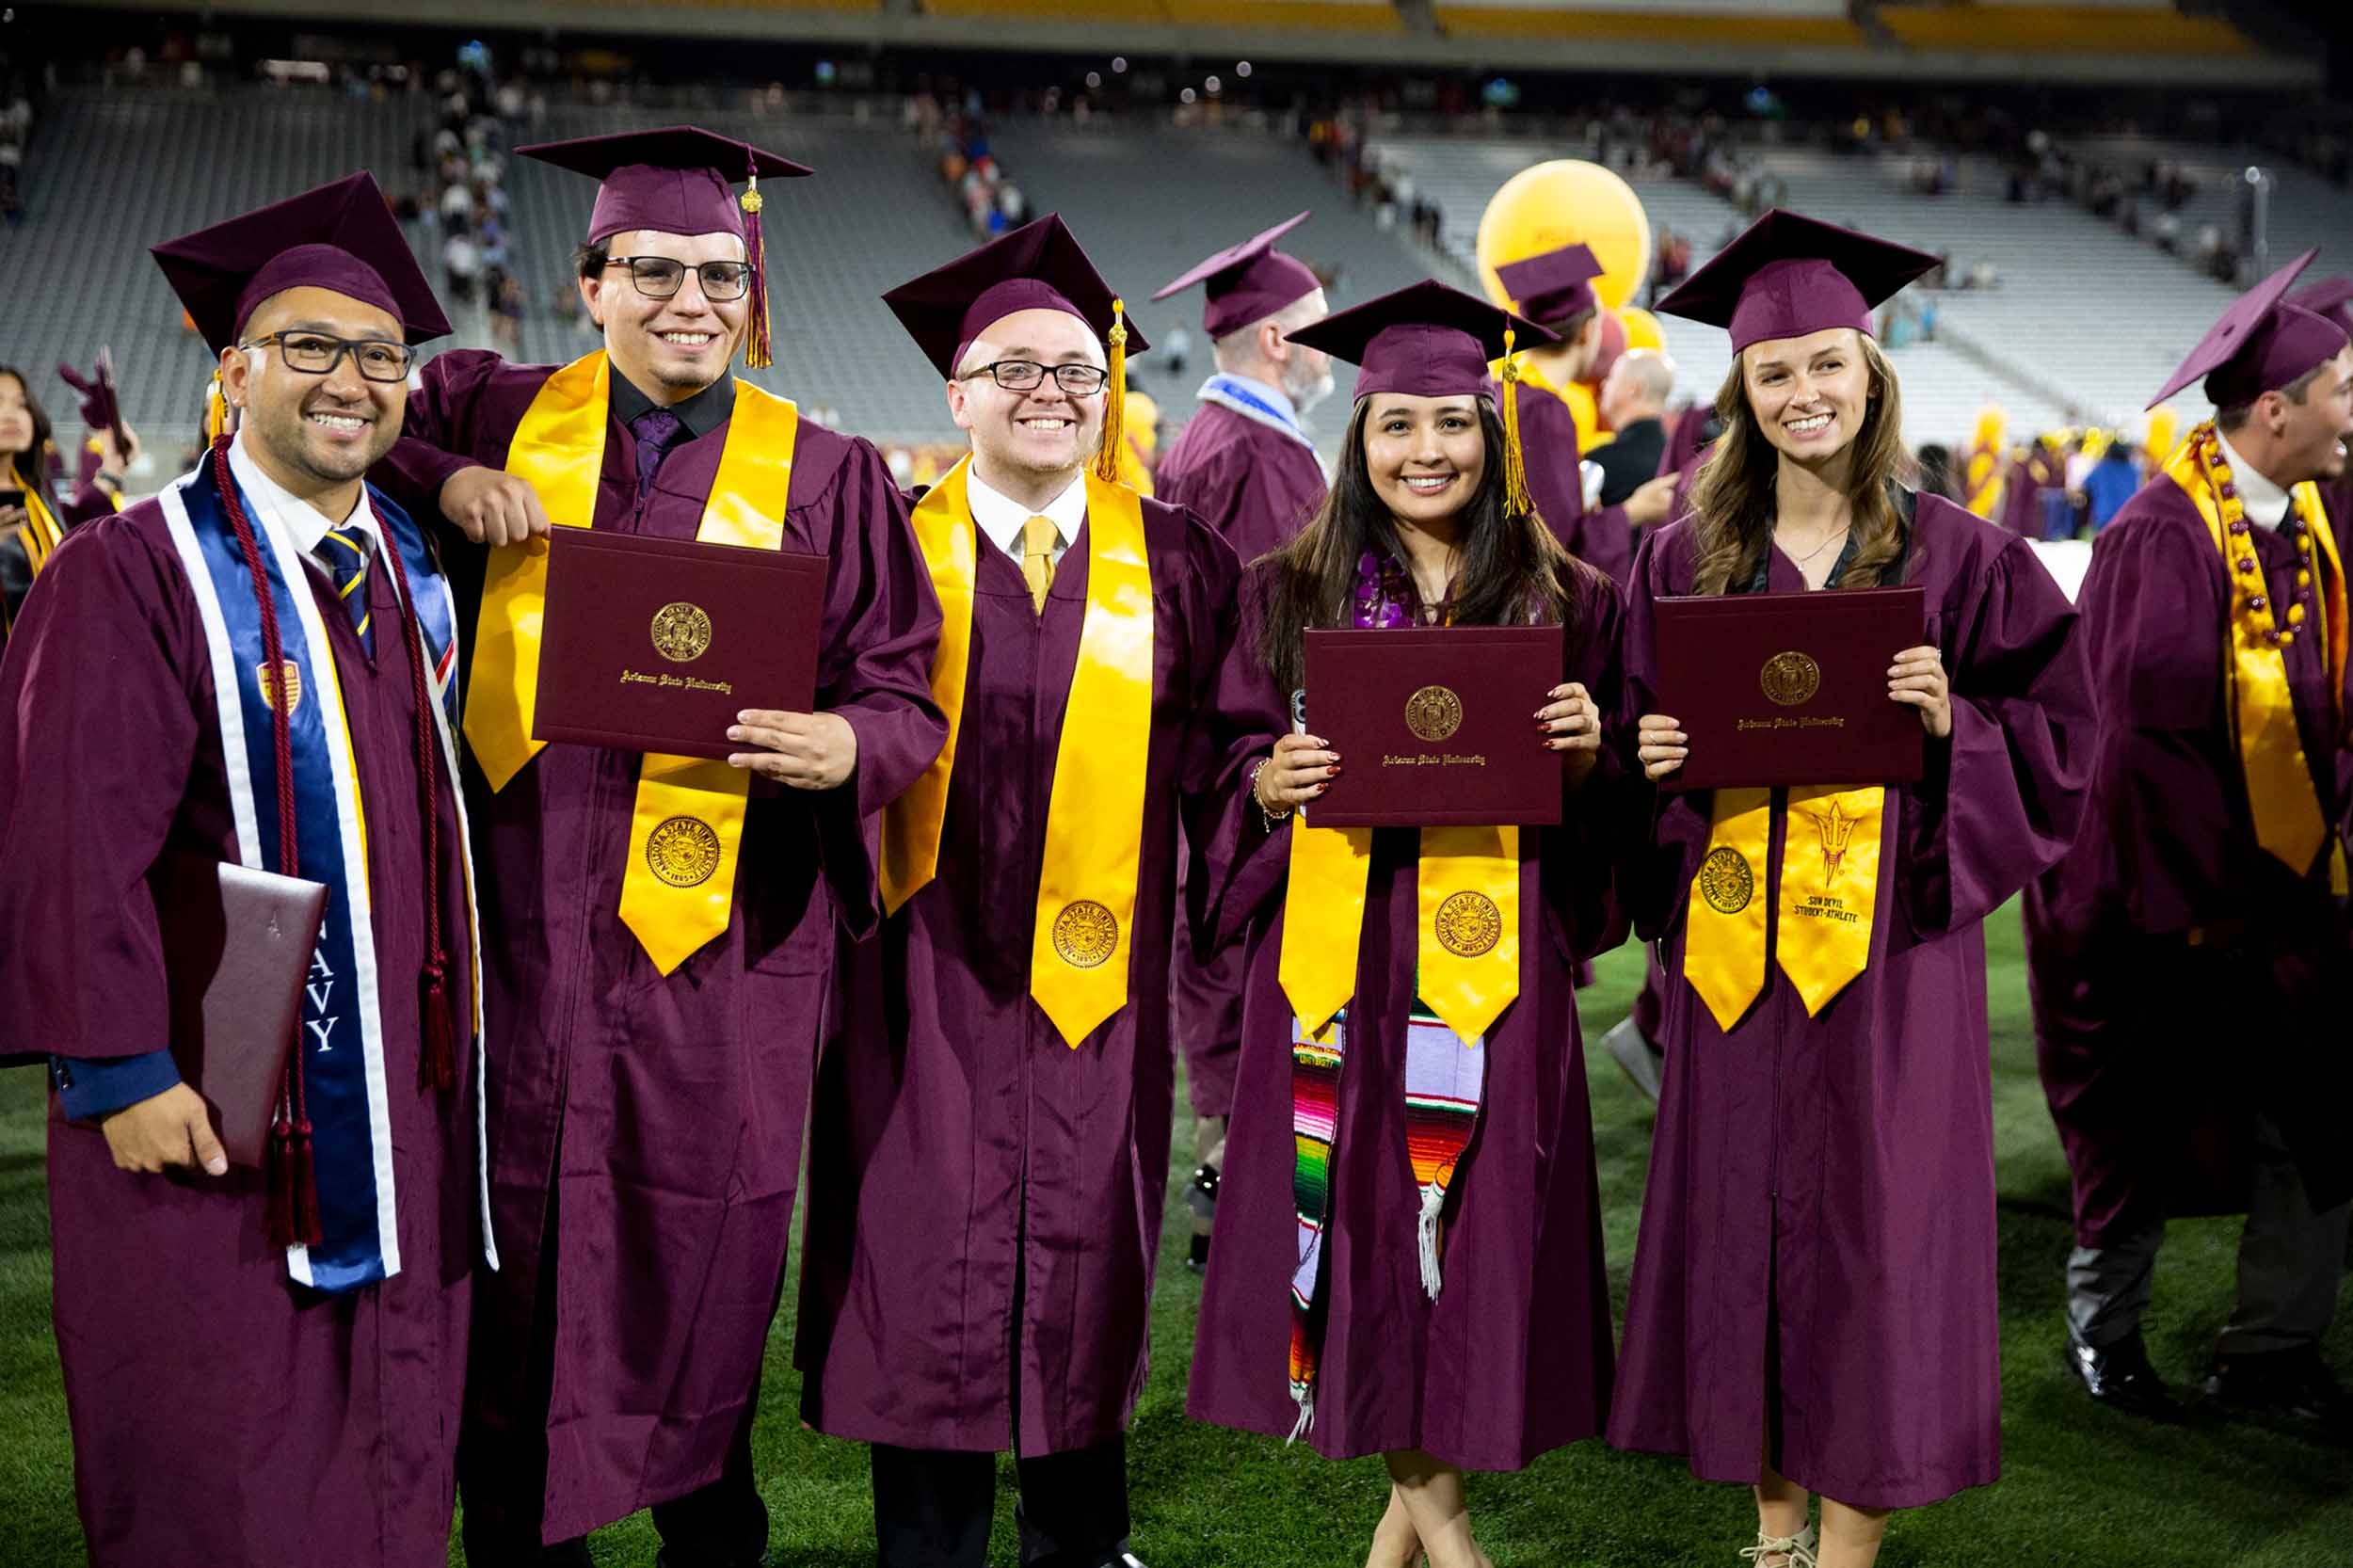 A group of 5 graduates stand together for the camera after a Fulton Schools Convocation ceremony in Sun Devil Stadium.